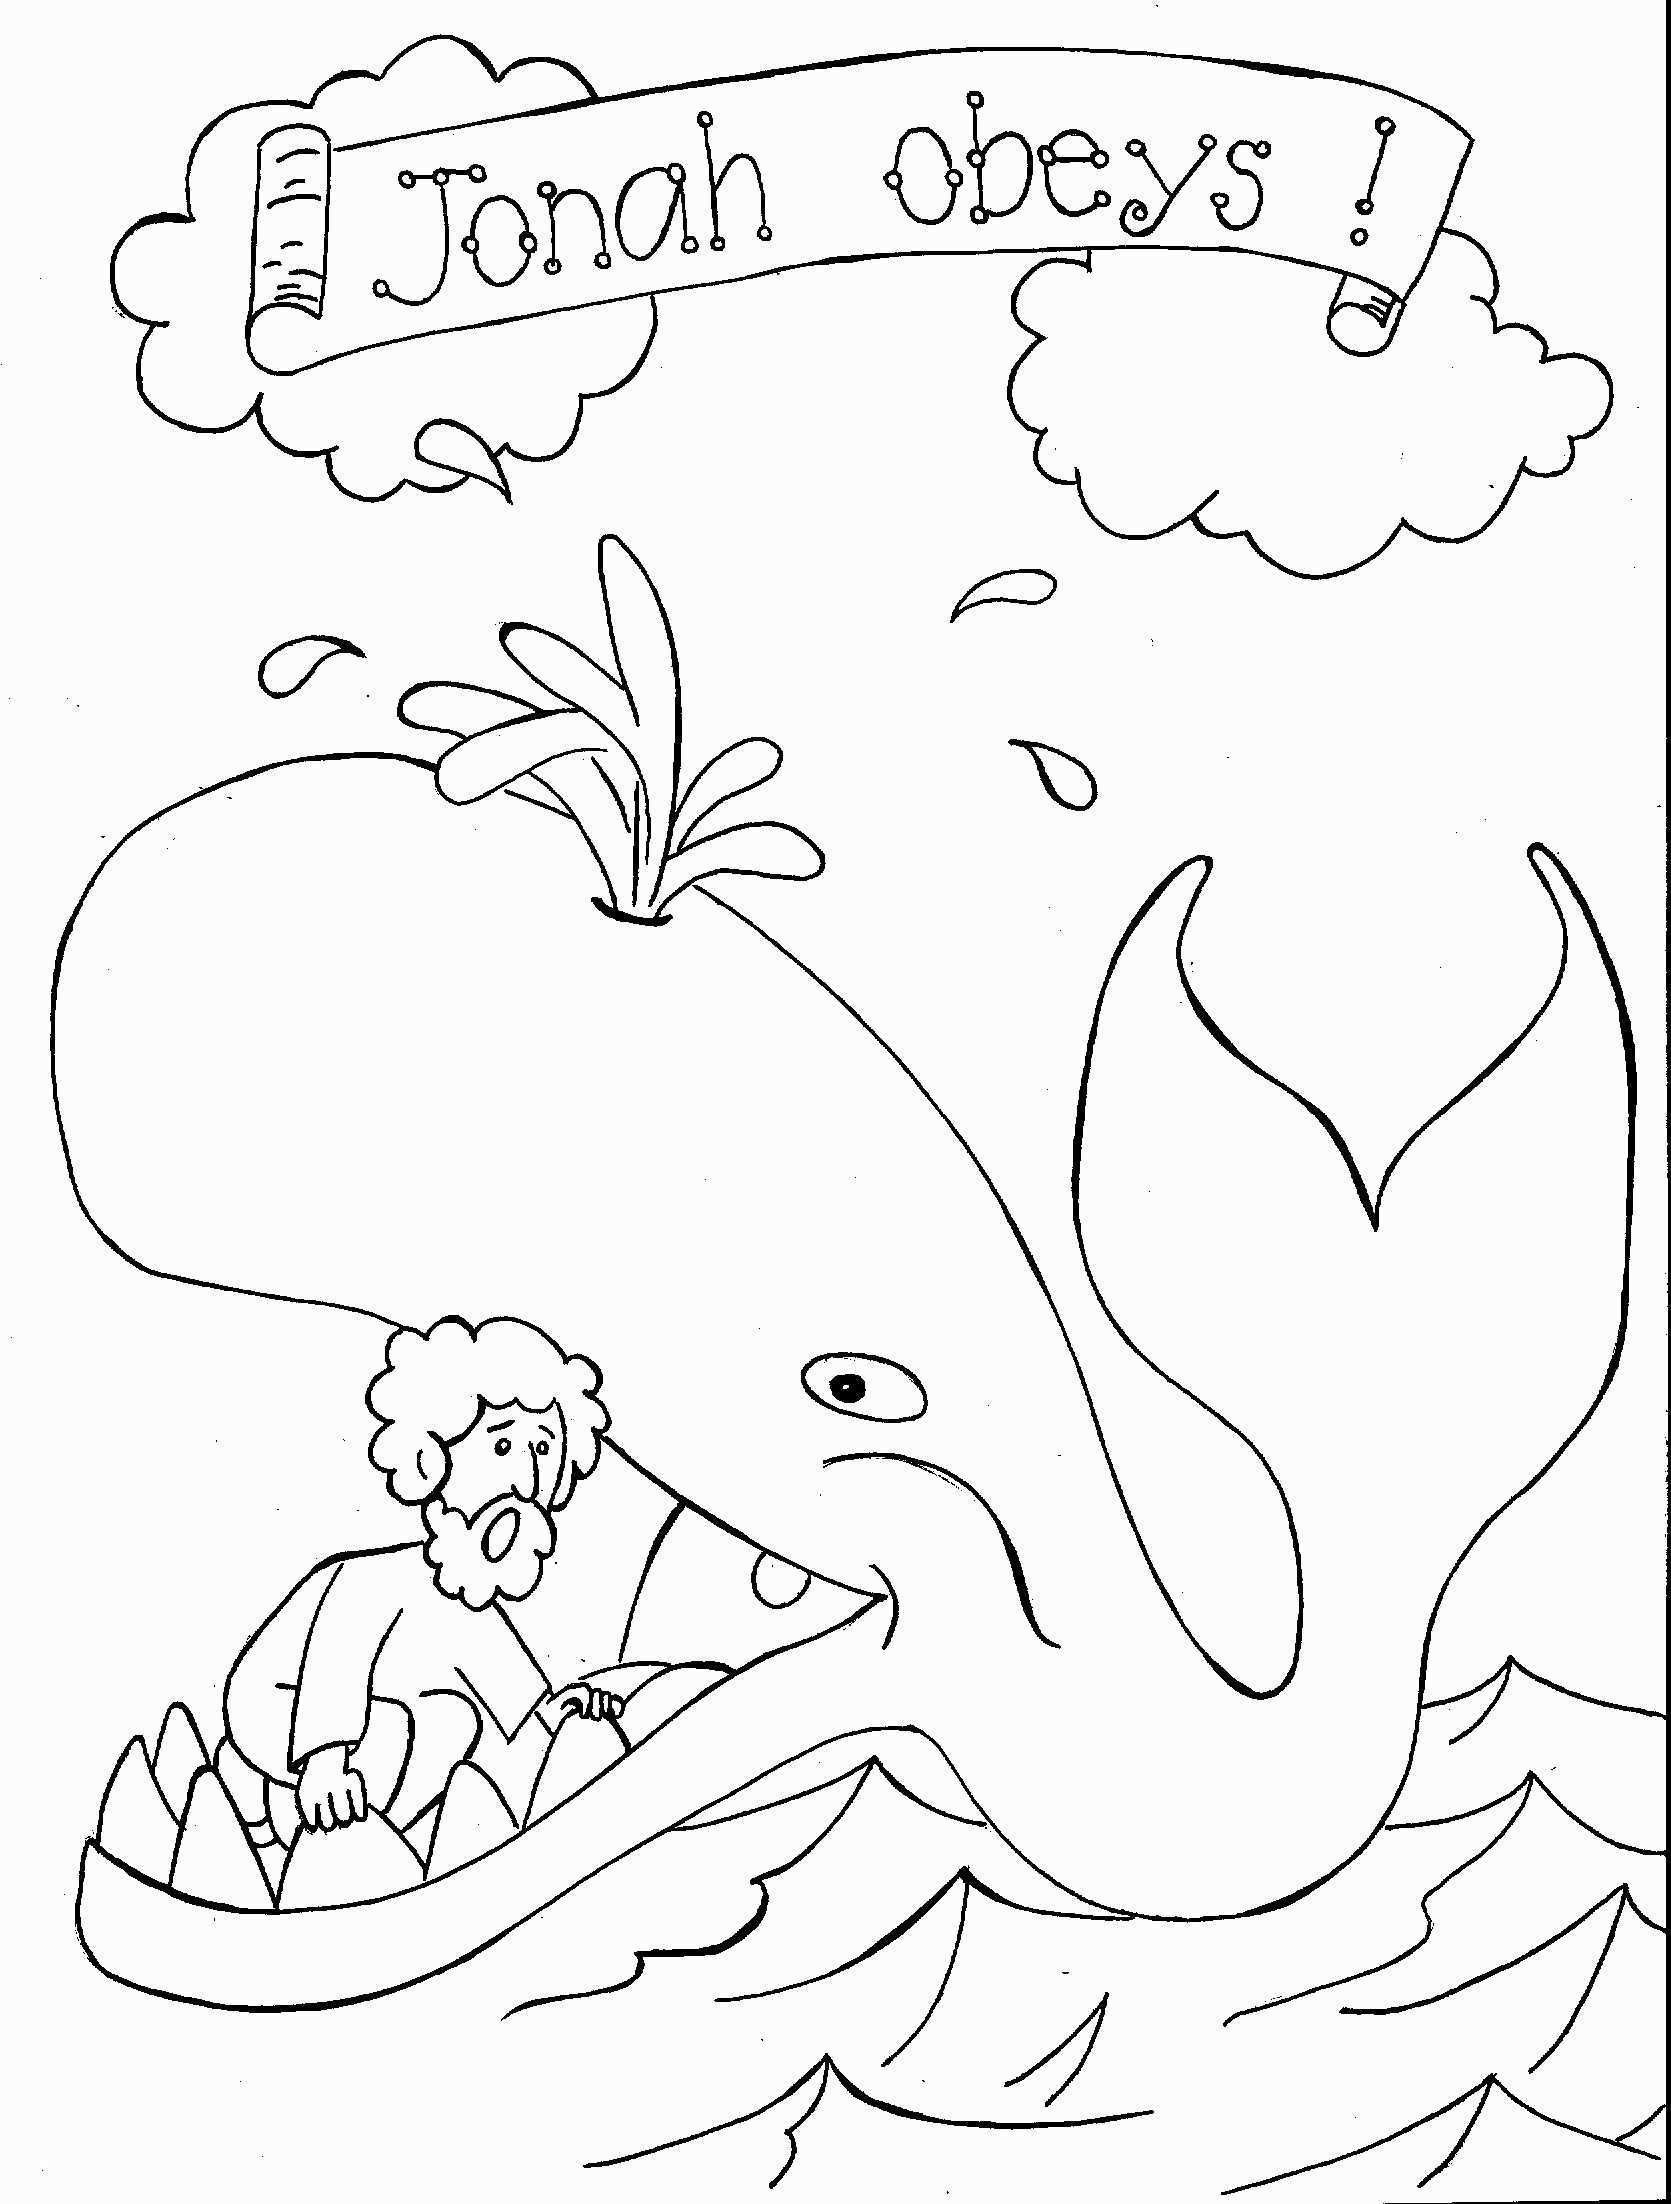 Luxury Free Coloring Pages In Spanish | Jvzooreview - Free Printable Bible Characters Coloring Pages